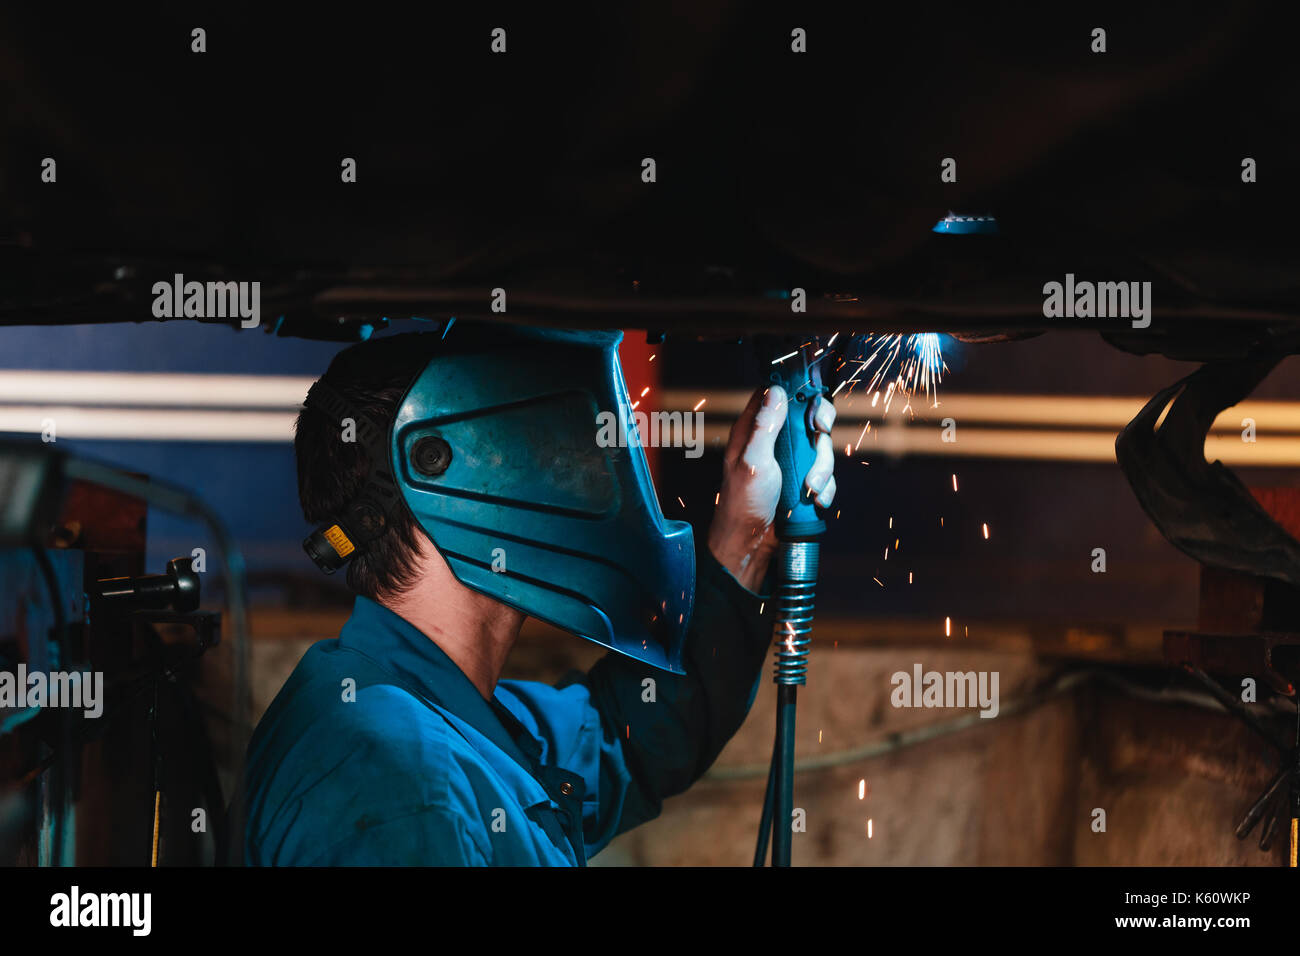 Man in a mask does welding machines. Stock Photo